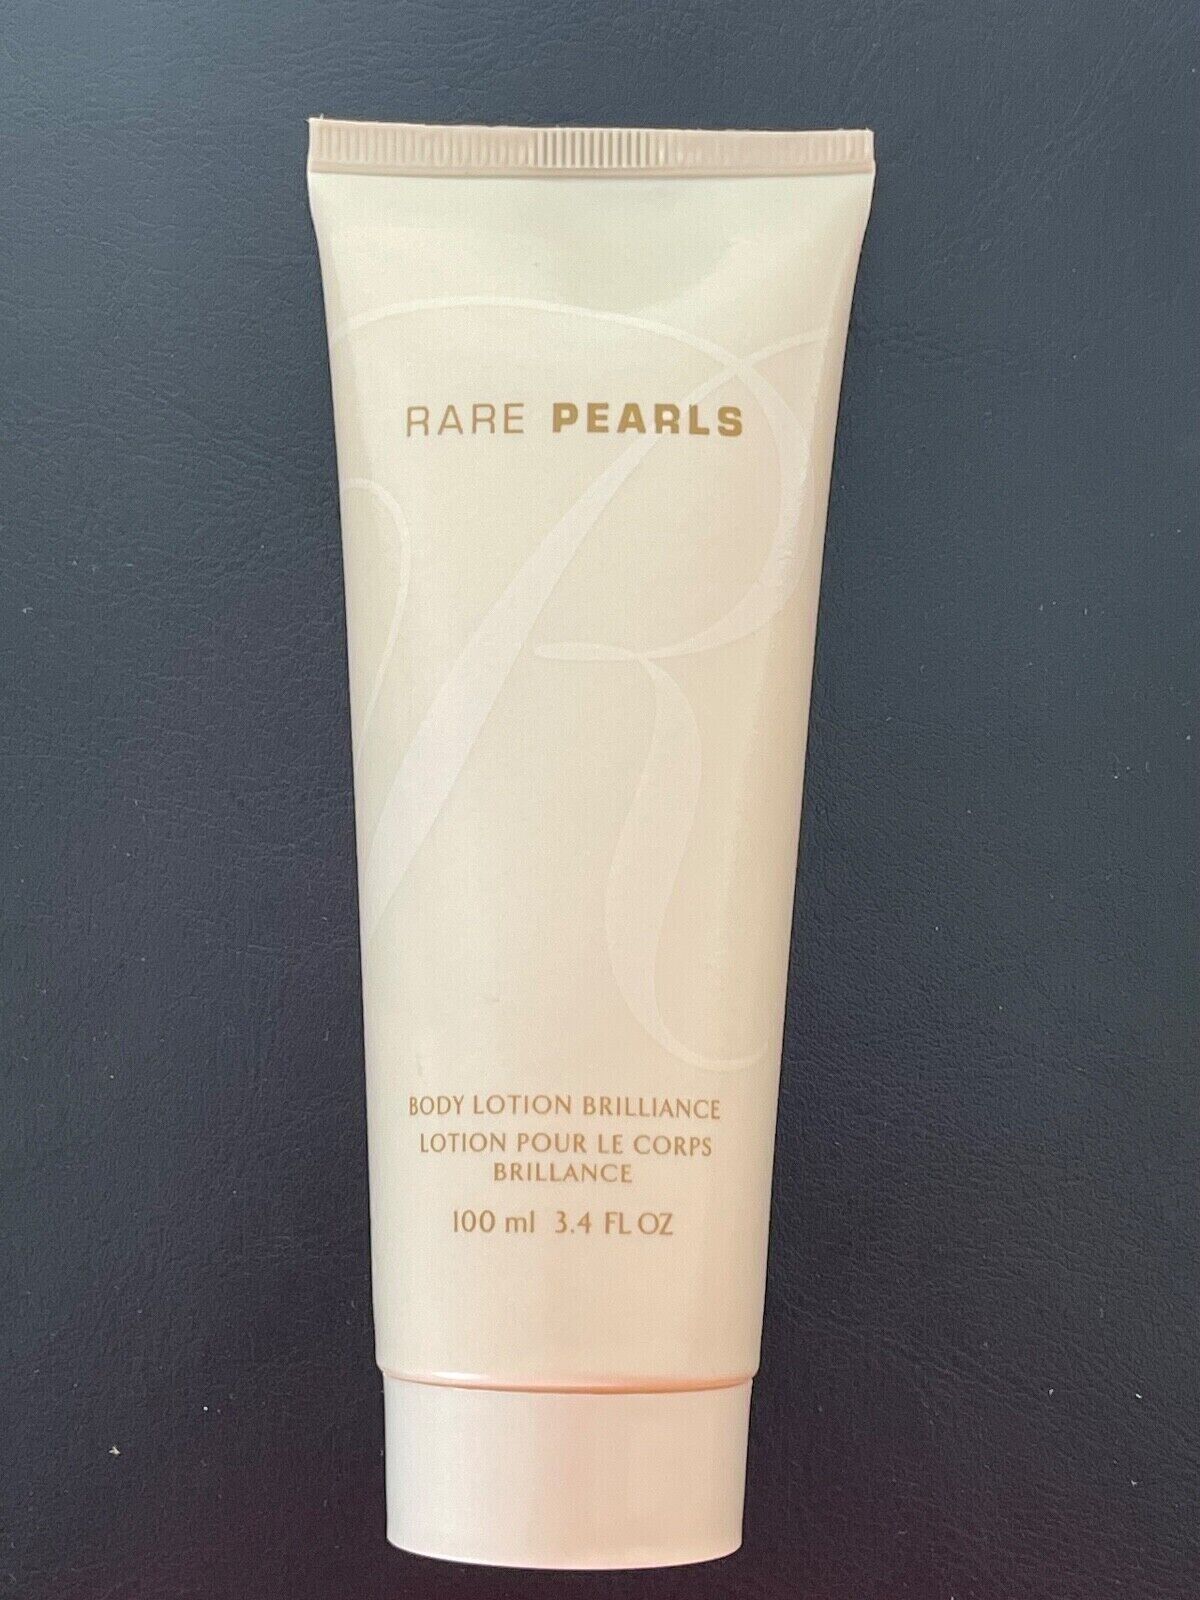 Primary image for NEW Avon "Rare Pearls" body lotion  6.7 oz -